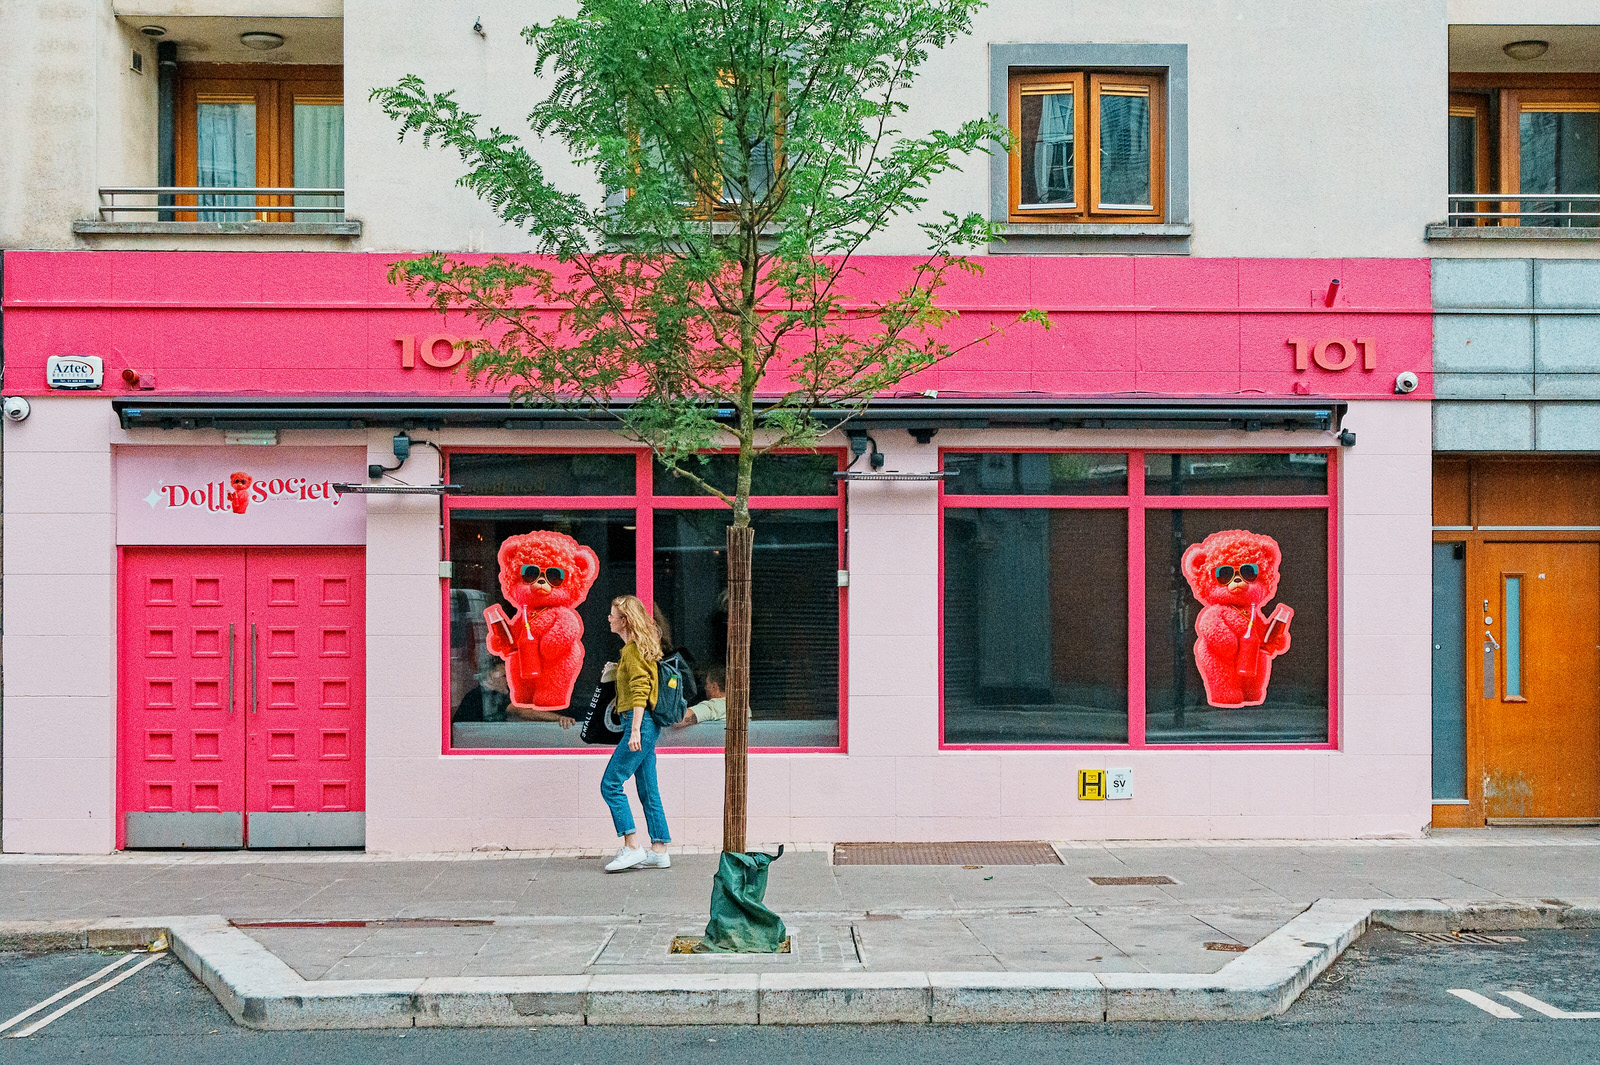 WHEN I FIRST SAW THIS I THOUGHT THAT IT WAS A REALLY REALLY PINK TOY SHOP